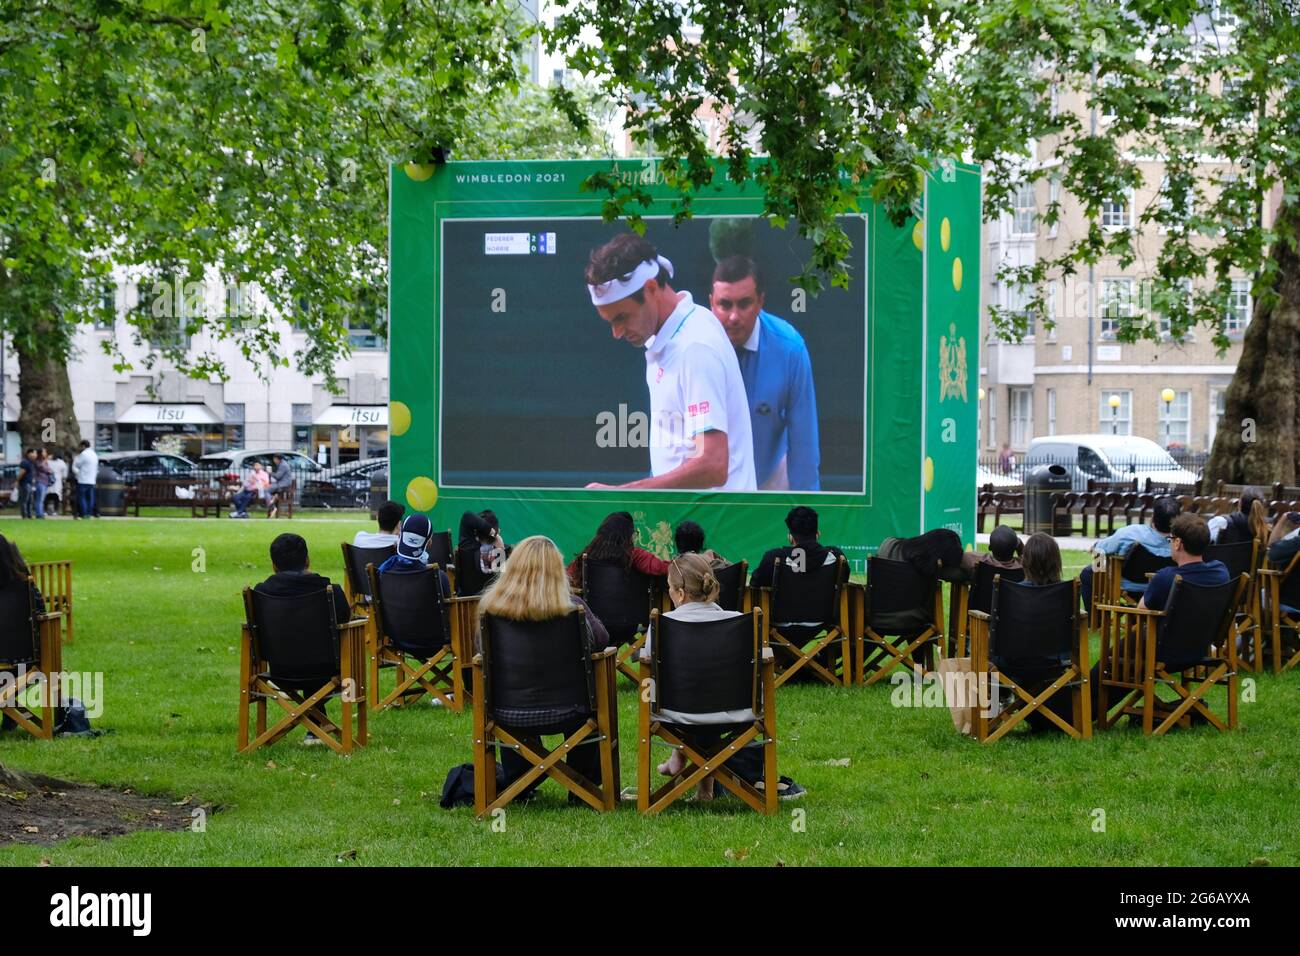 Spectators watch a live public screening of a Wimbledon tennis match between Federer and Norrie in Berkeley Square, Mayfair Stock Photo